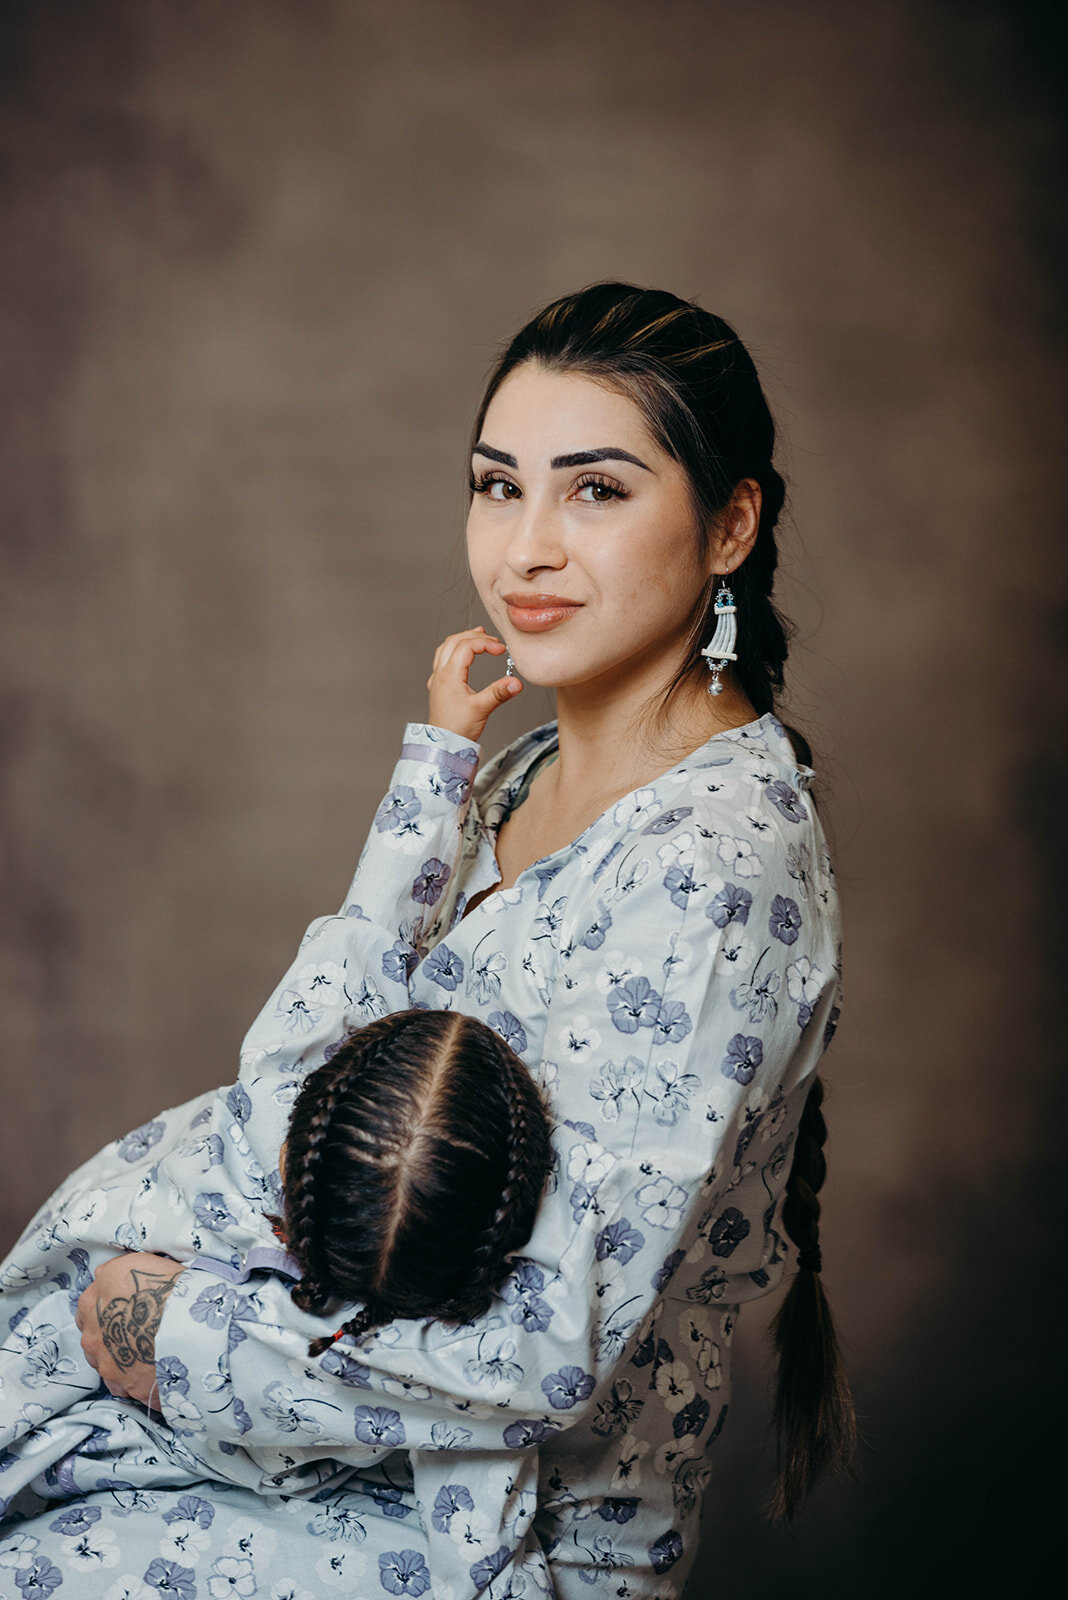 Seneca Mothers.

A recent project with my home tribal health care center provided an opportunity to share the history and story behind tribal women and her journey in finding purpose and identity. A multi-generational approach to motherhood through b